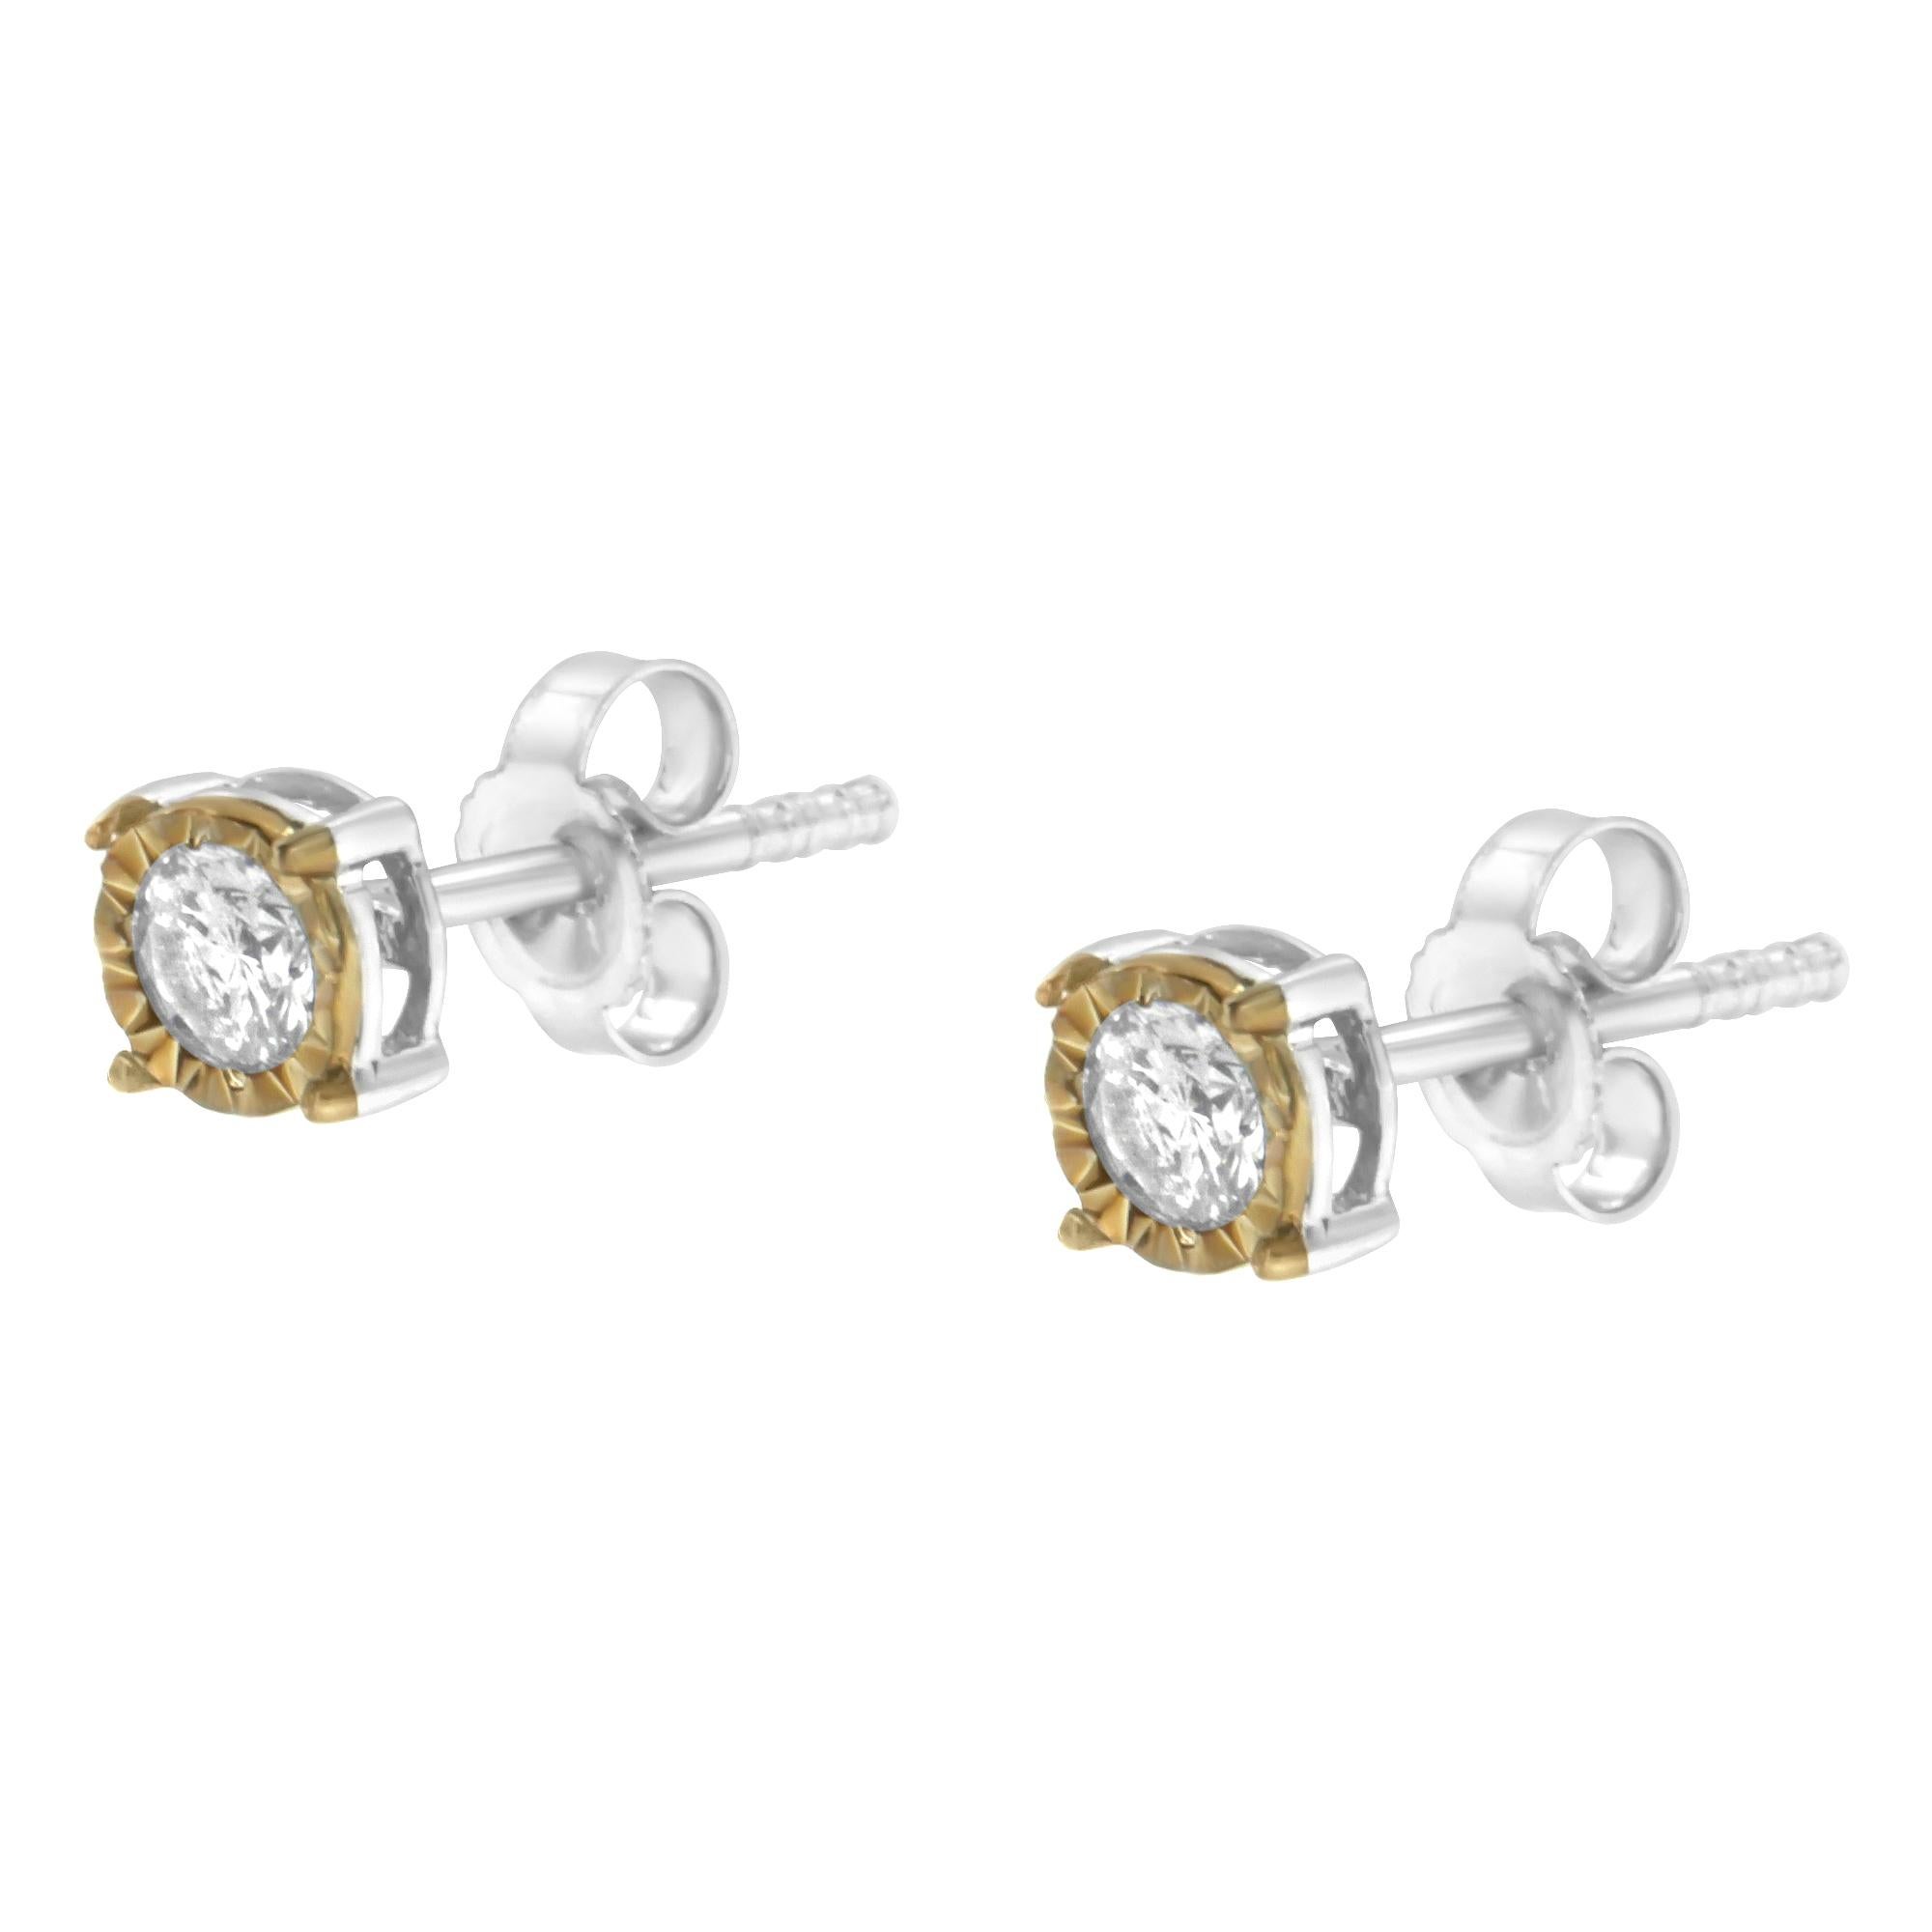 Round Cut 10K Yellow & White Gold Over Sterling Silver 3/8 Carat Diamond Stud Earrings